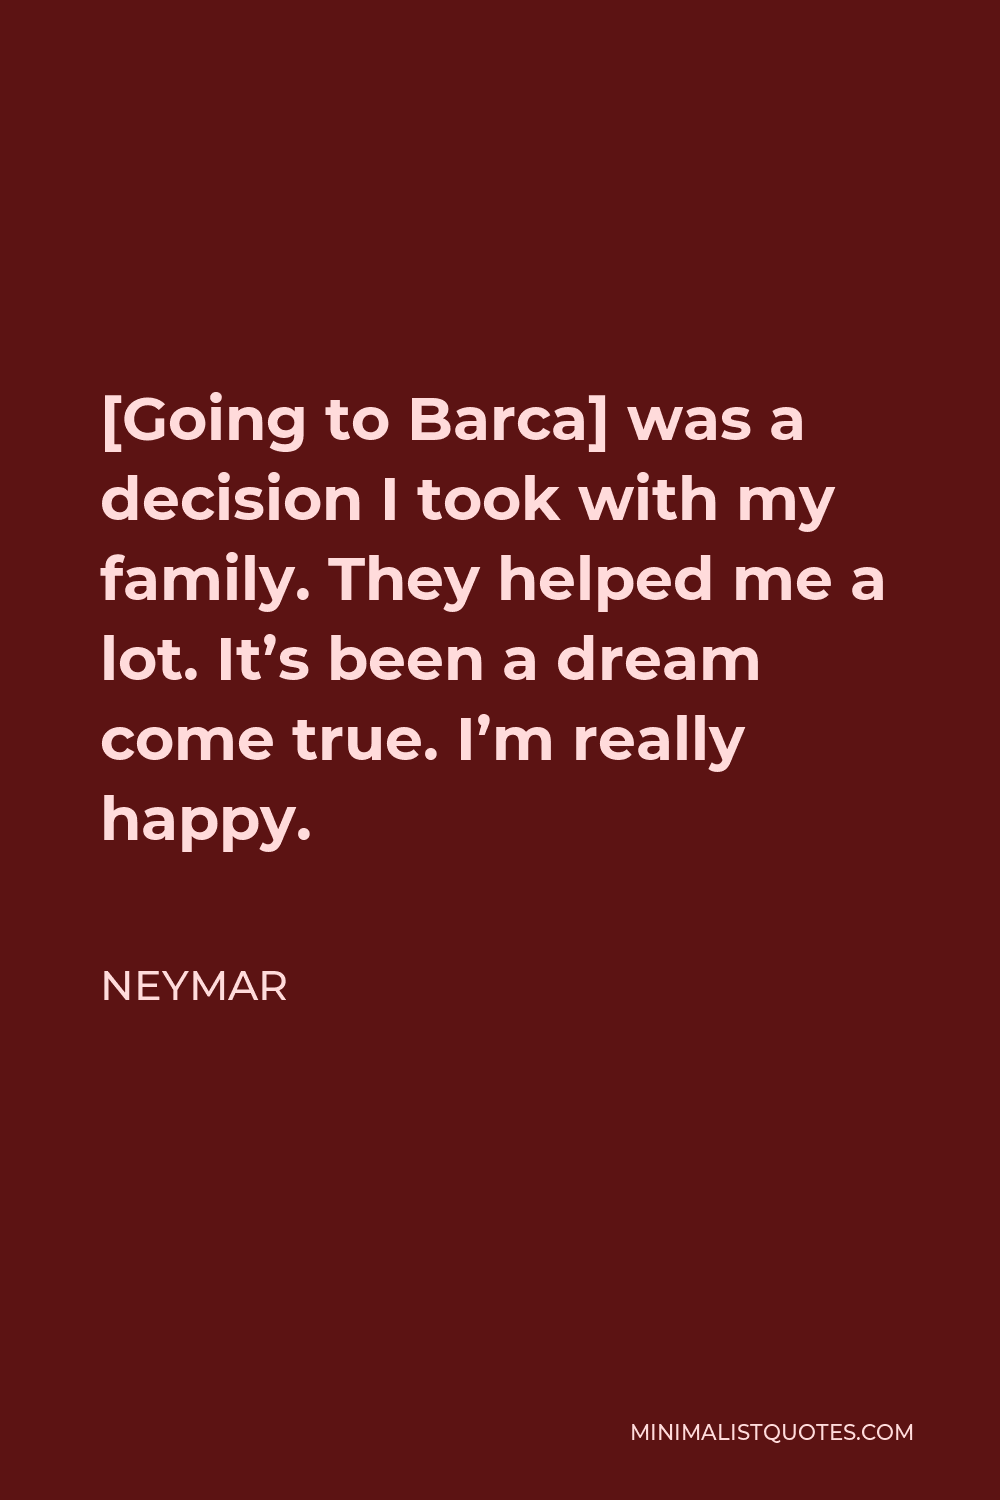 Neymar Quote - [Going to Barca] was a decision I took with my family. They helped me a lot. It’s been a dream come true. I’m really happy.